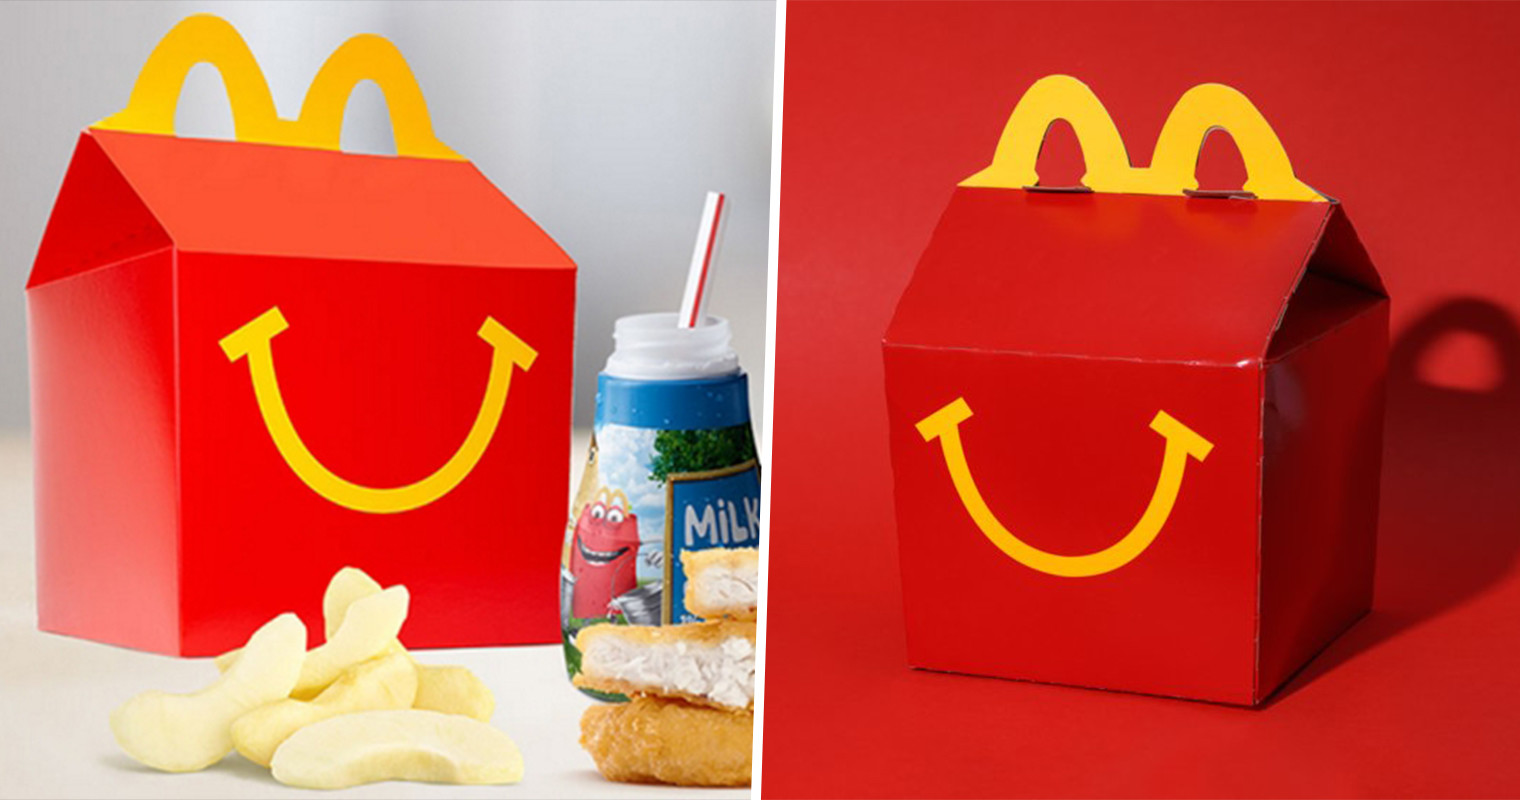 McDonald's releases Happy Meal box template you can download and print